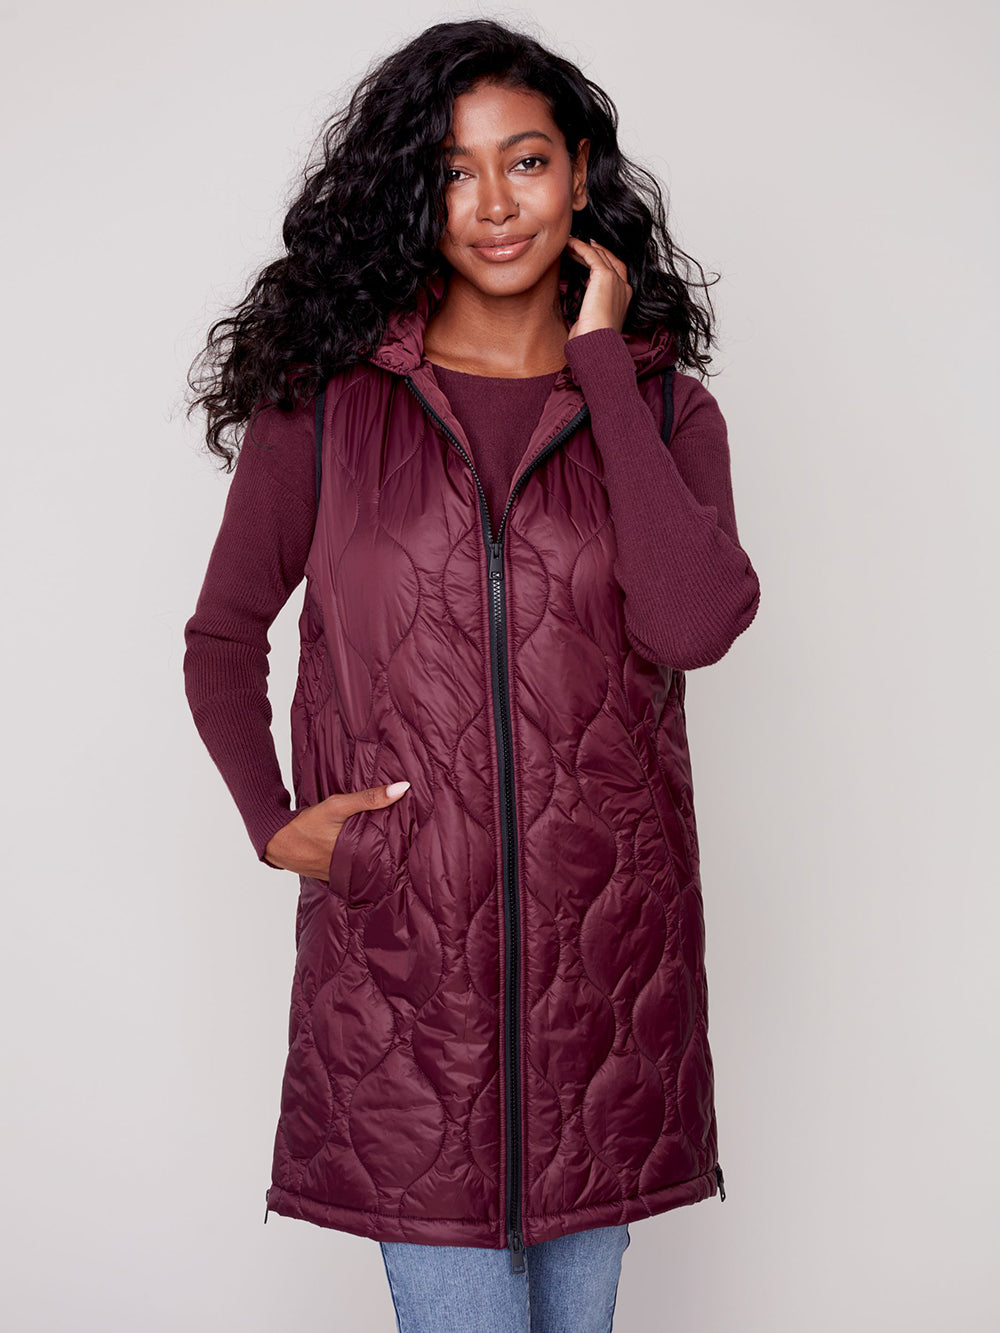 Charlie B Quilted Puffer Vest - Style C6268